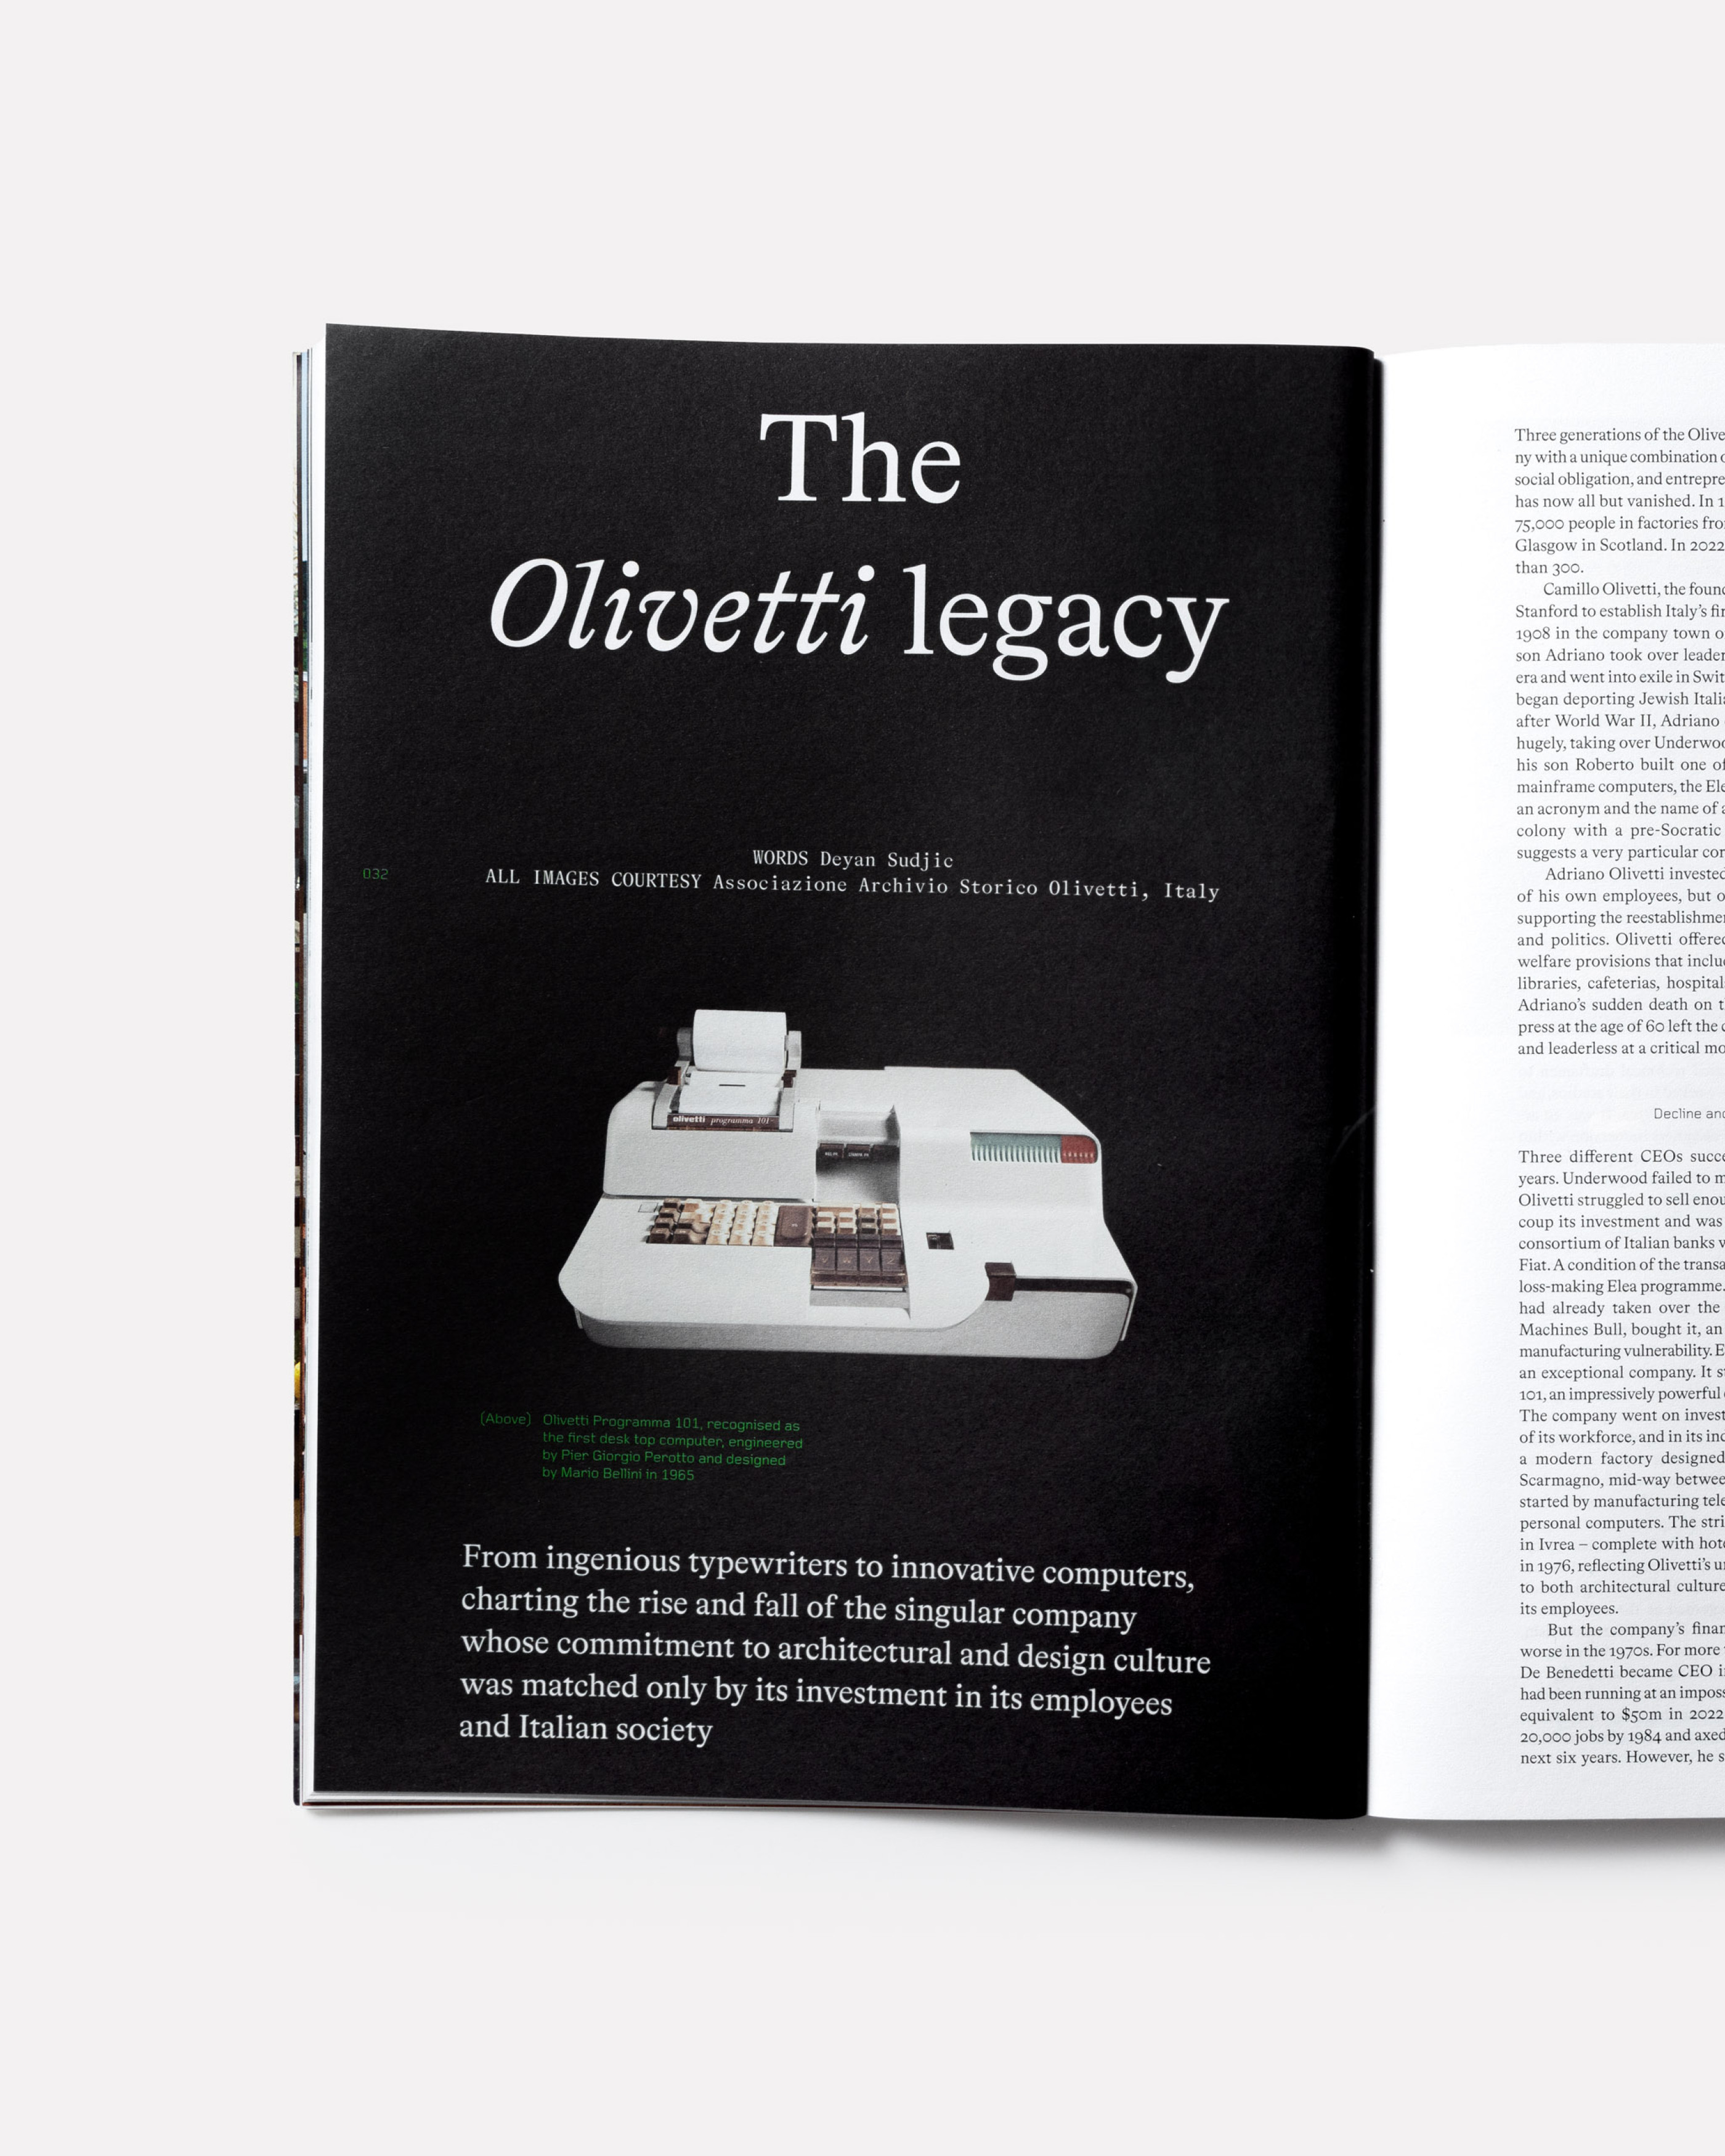 Inside spread of Anima magazine featuring the title ‘The Olivetti legacy’ on white background.